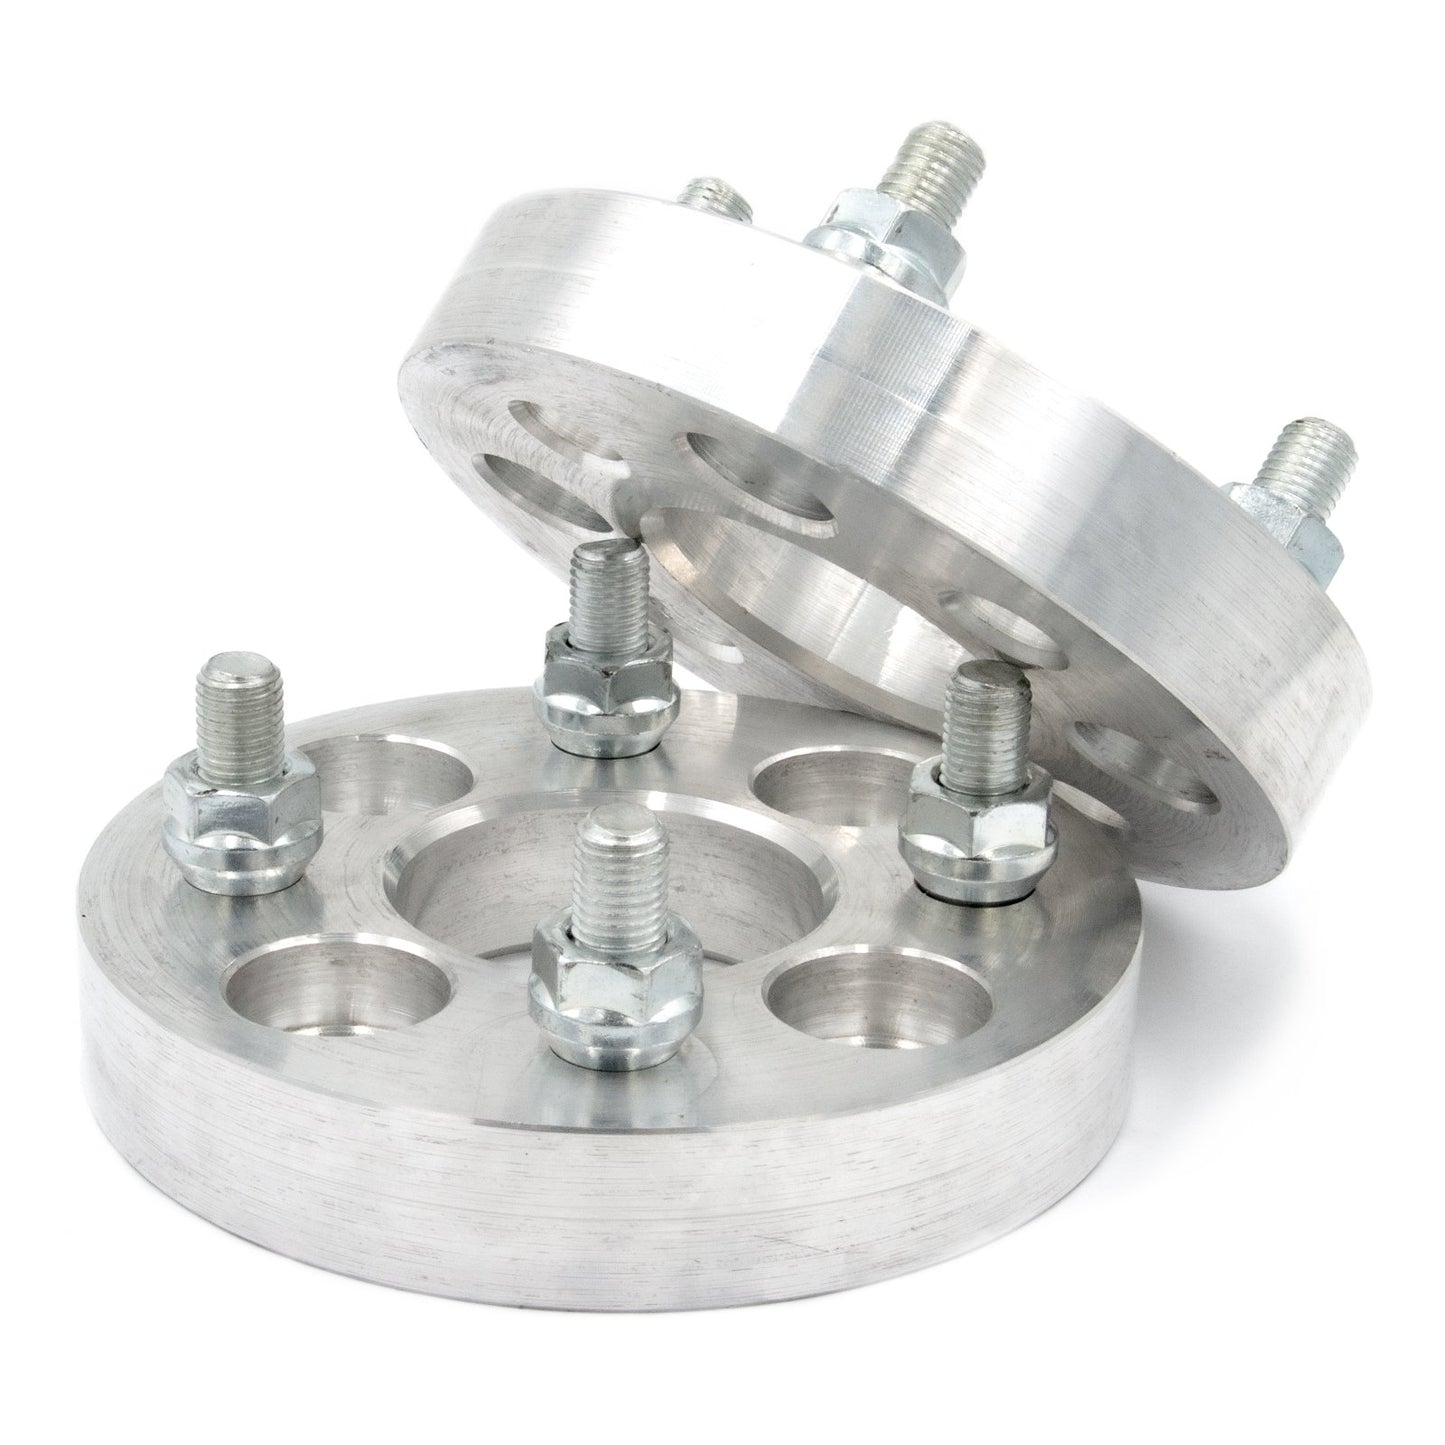 4x4" to 4x4.25" Wheel Spacer/Adapter - Thickness: 3/4"- 4"